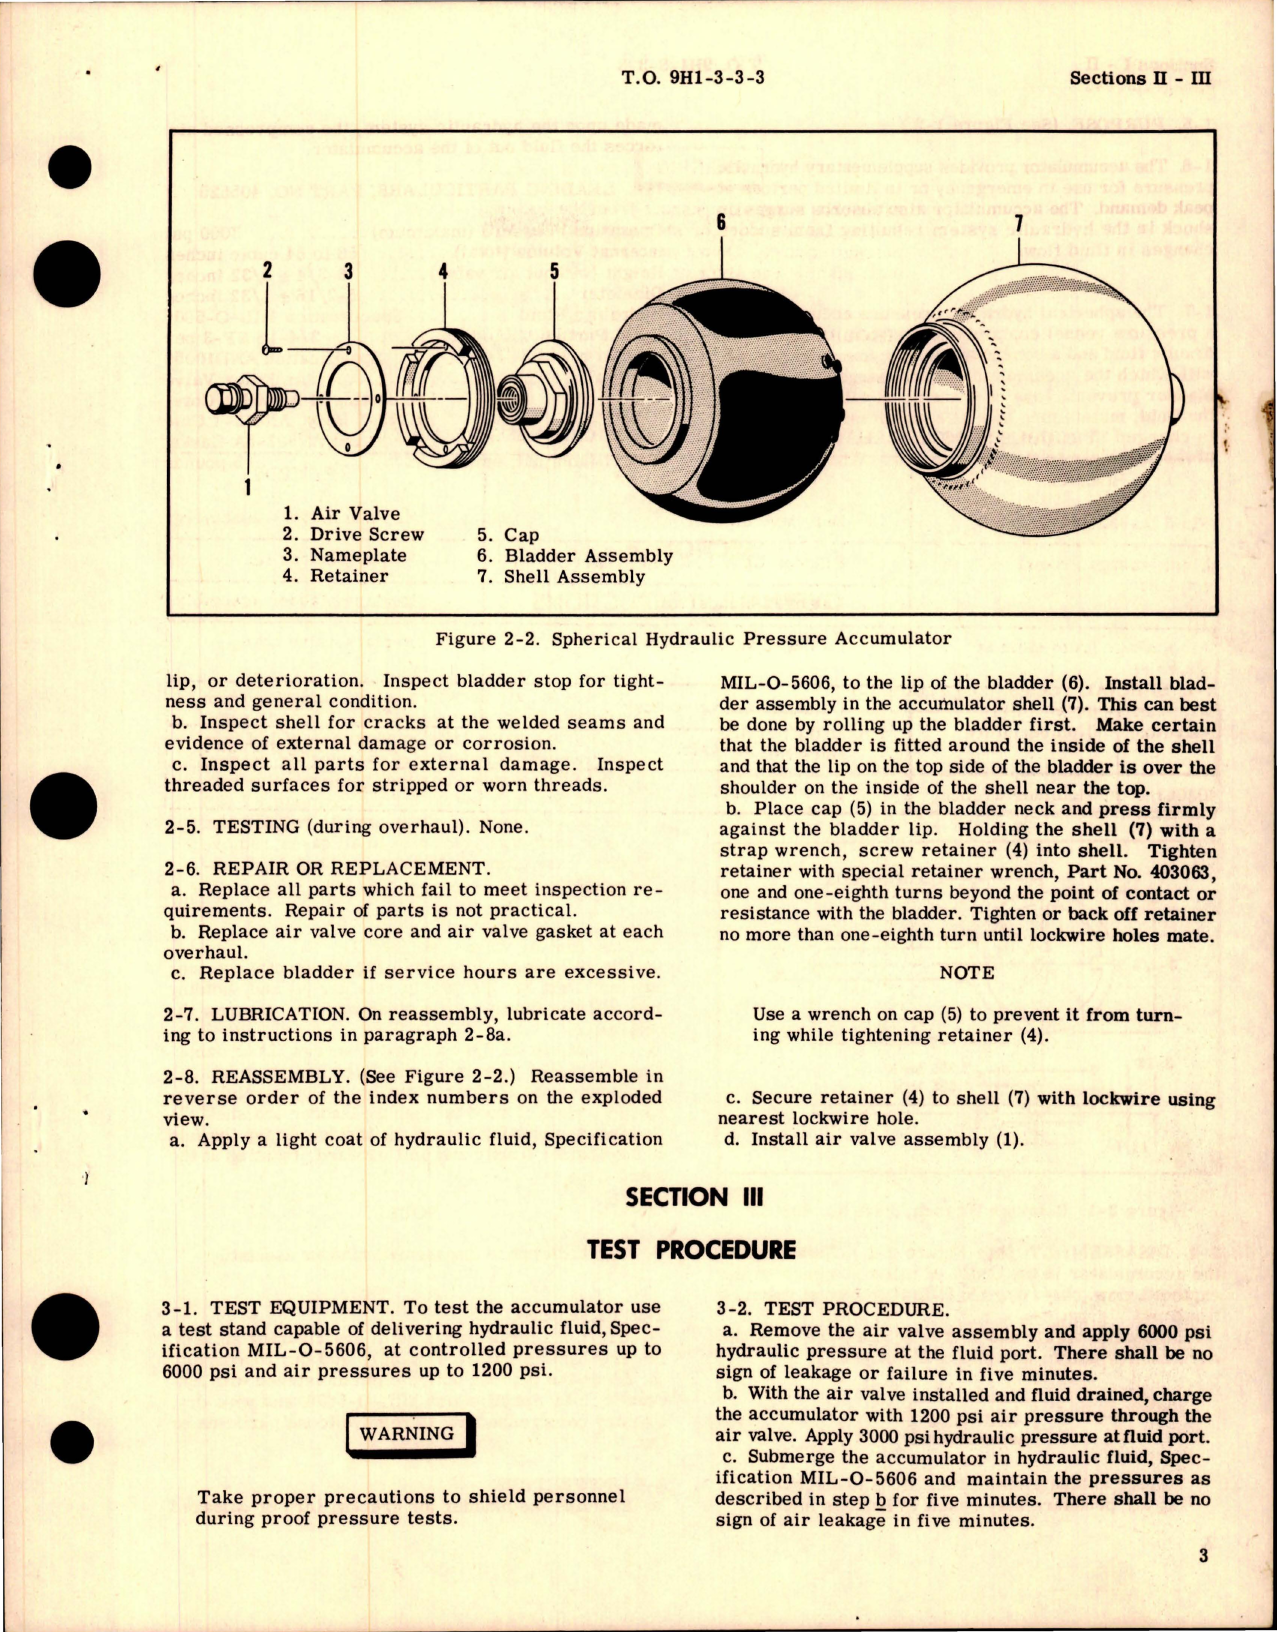 Sample page 5 from AirCorps Library document: Overhaul Instructions for Spherical Hydraulic Pressure Accumulators - 3000 psi 